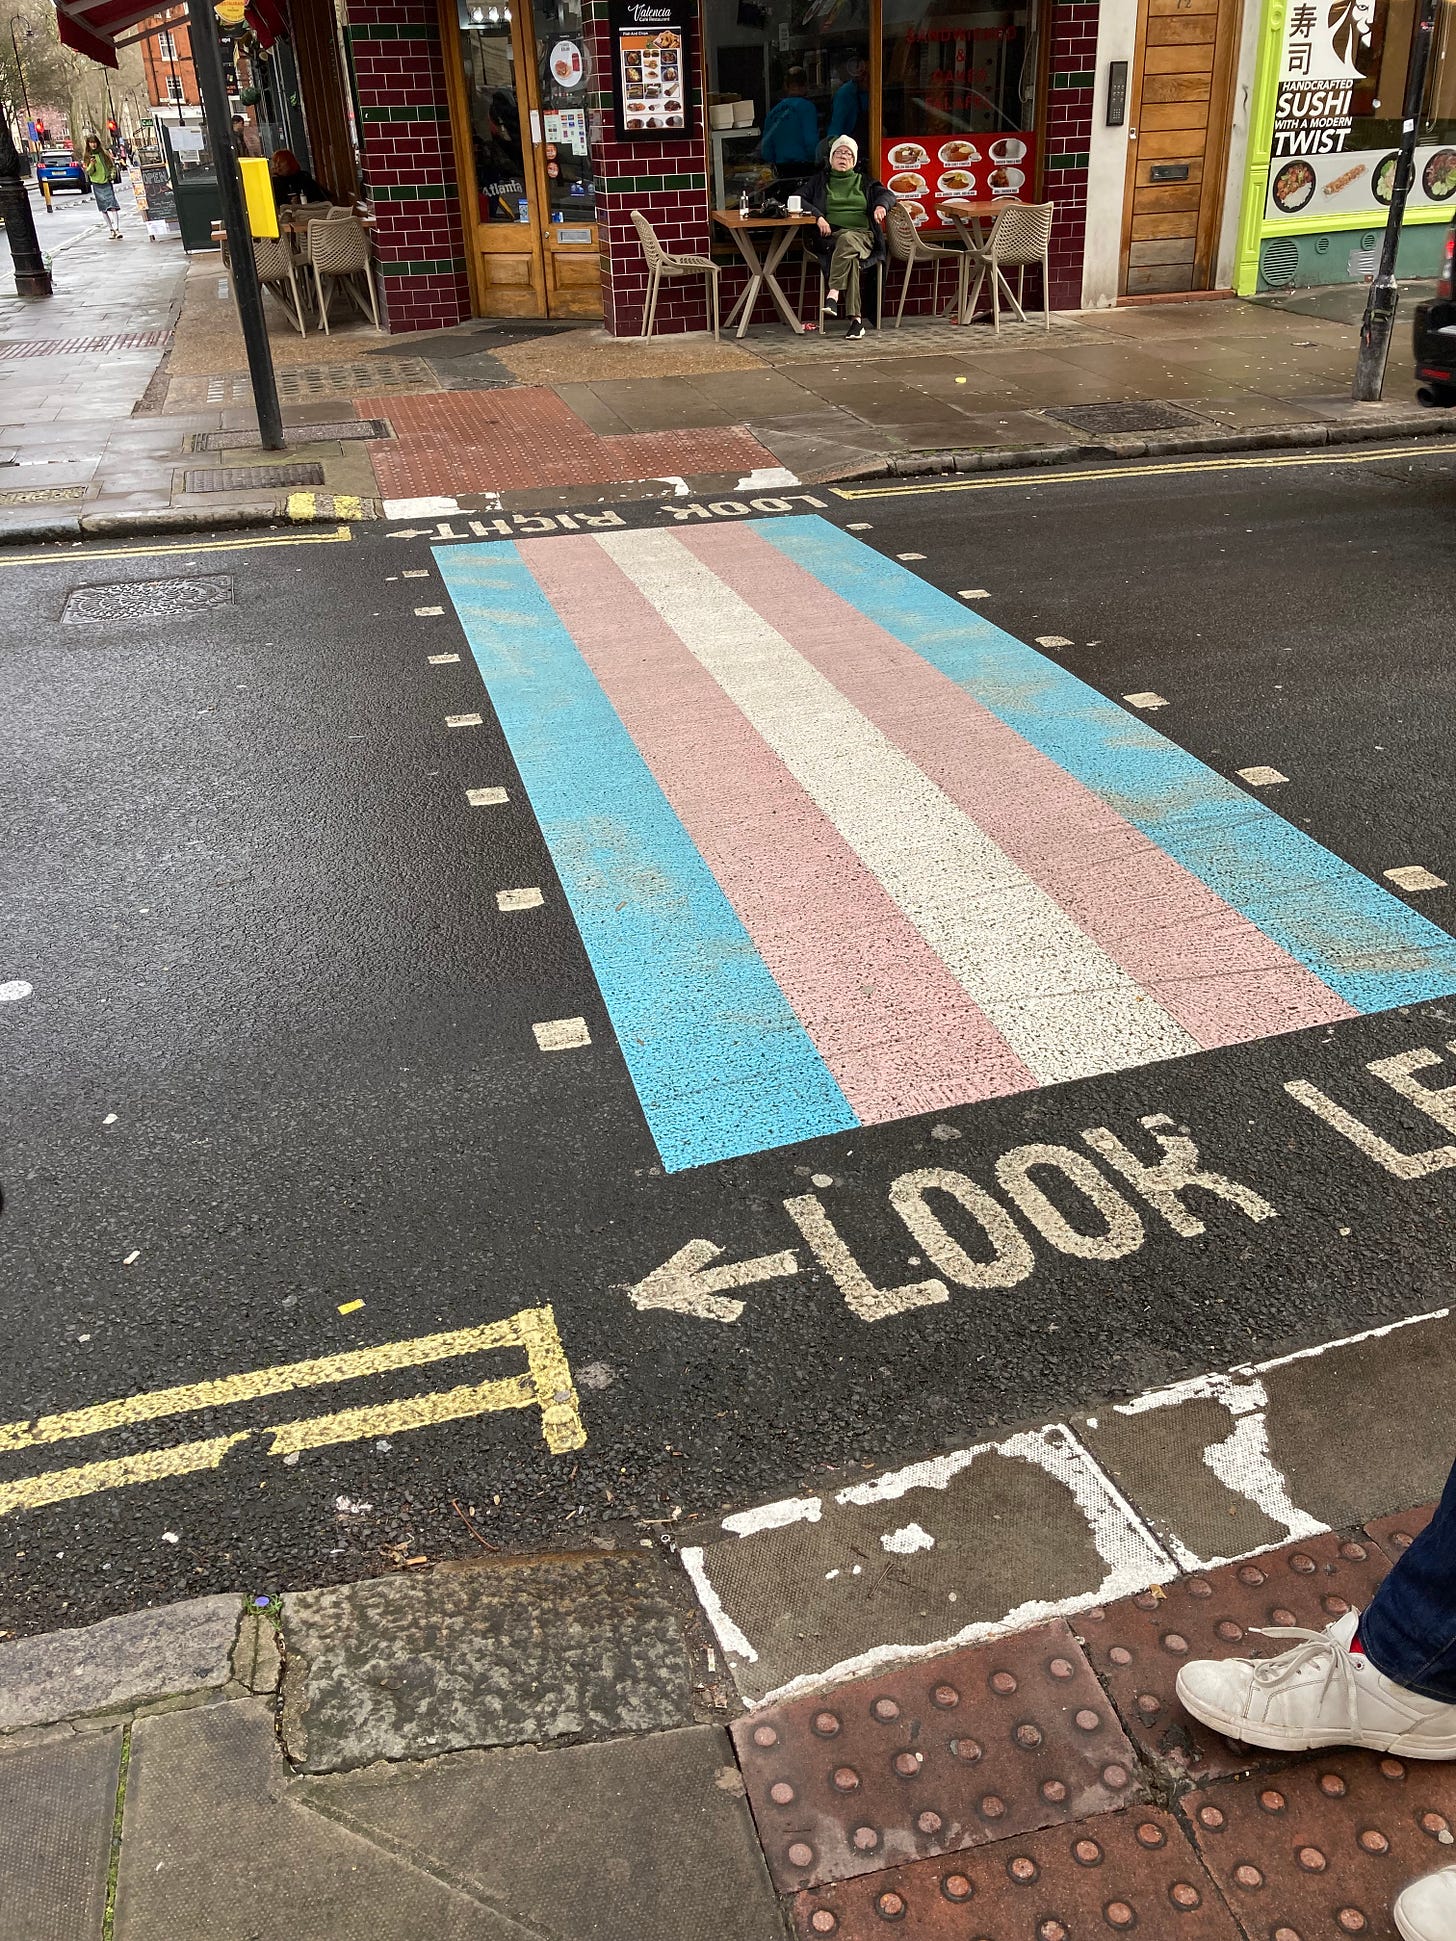 Photograph of a road crossing, which has been painted as a transgender flag.